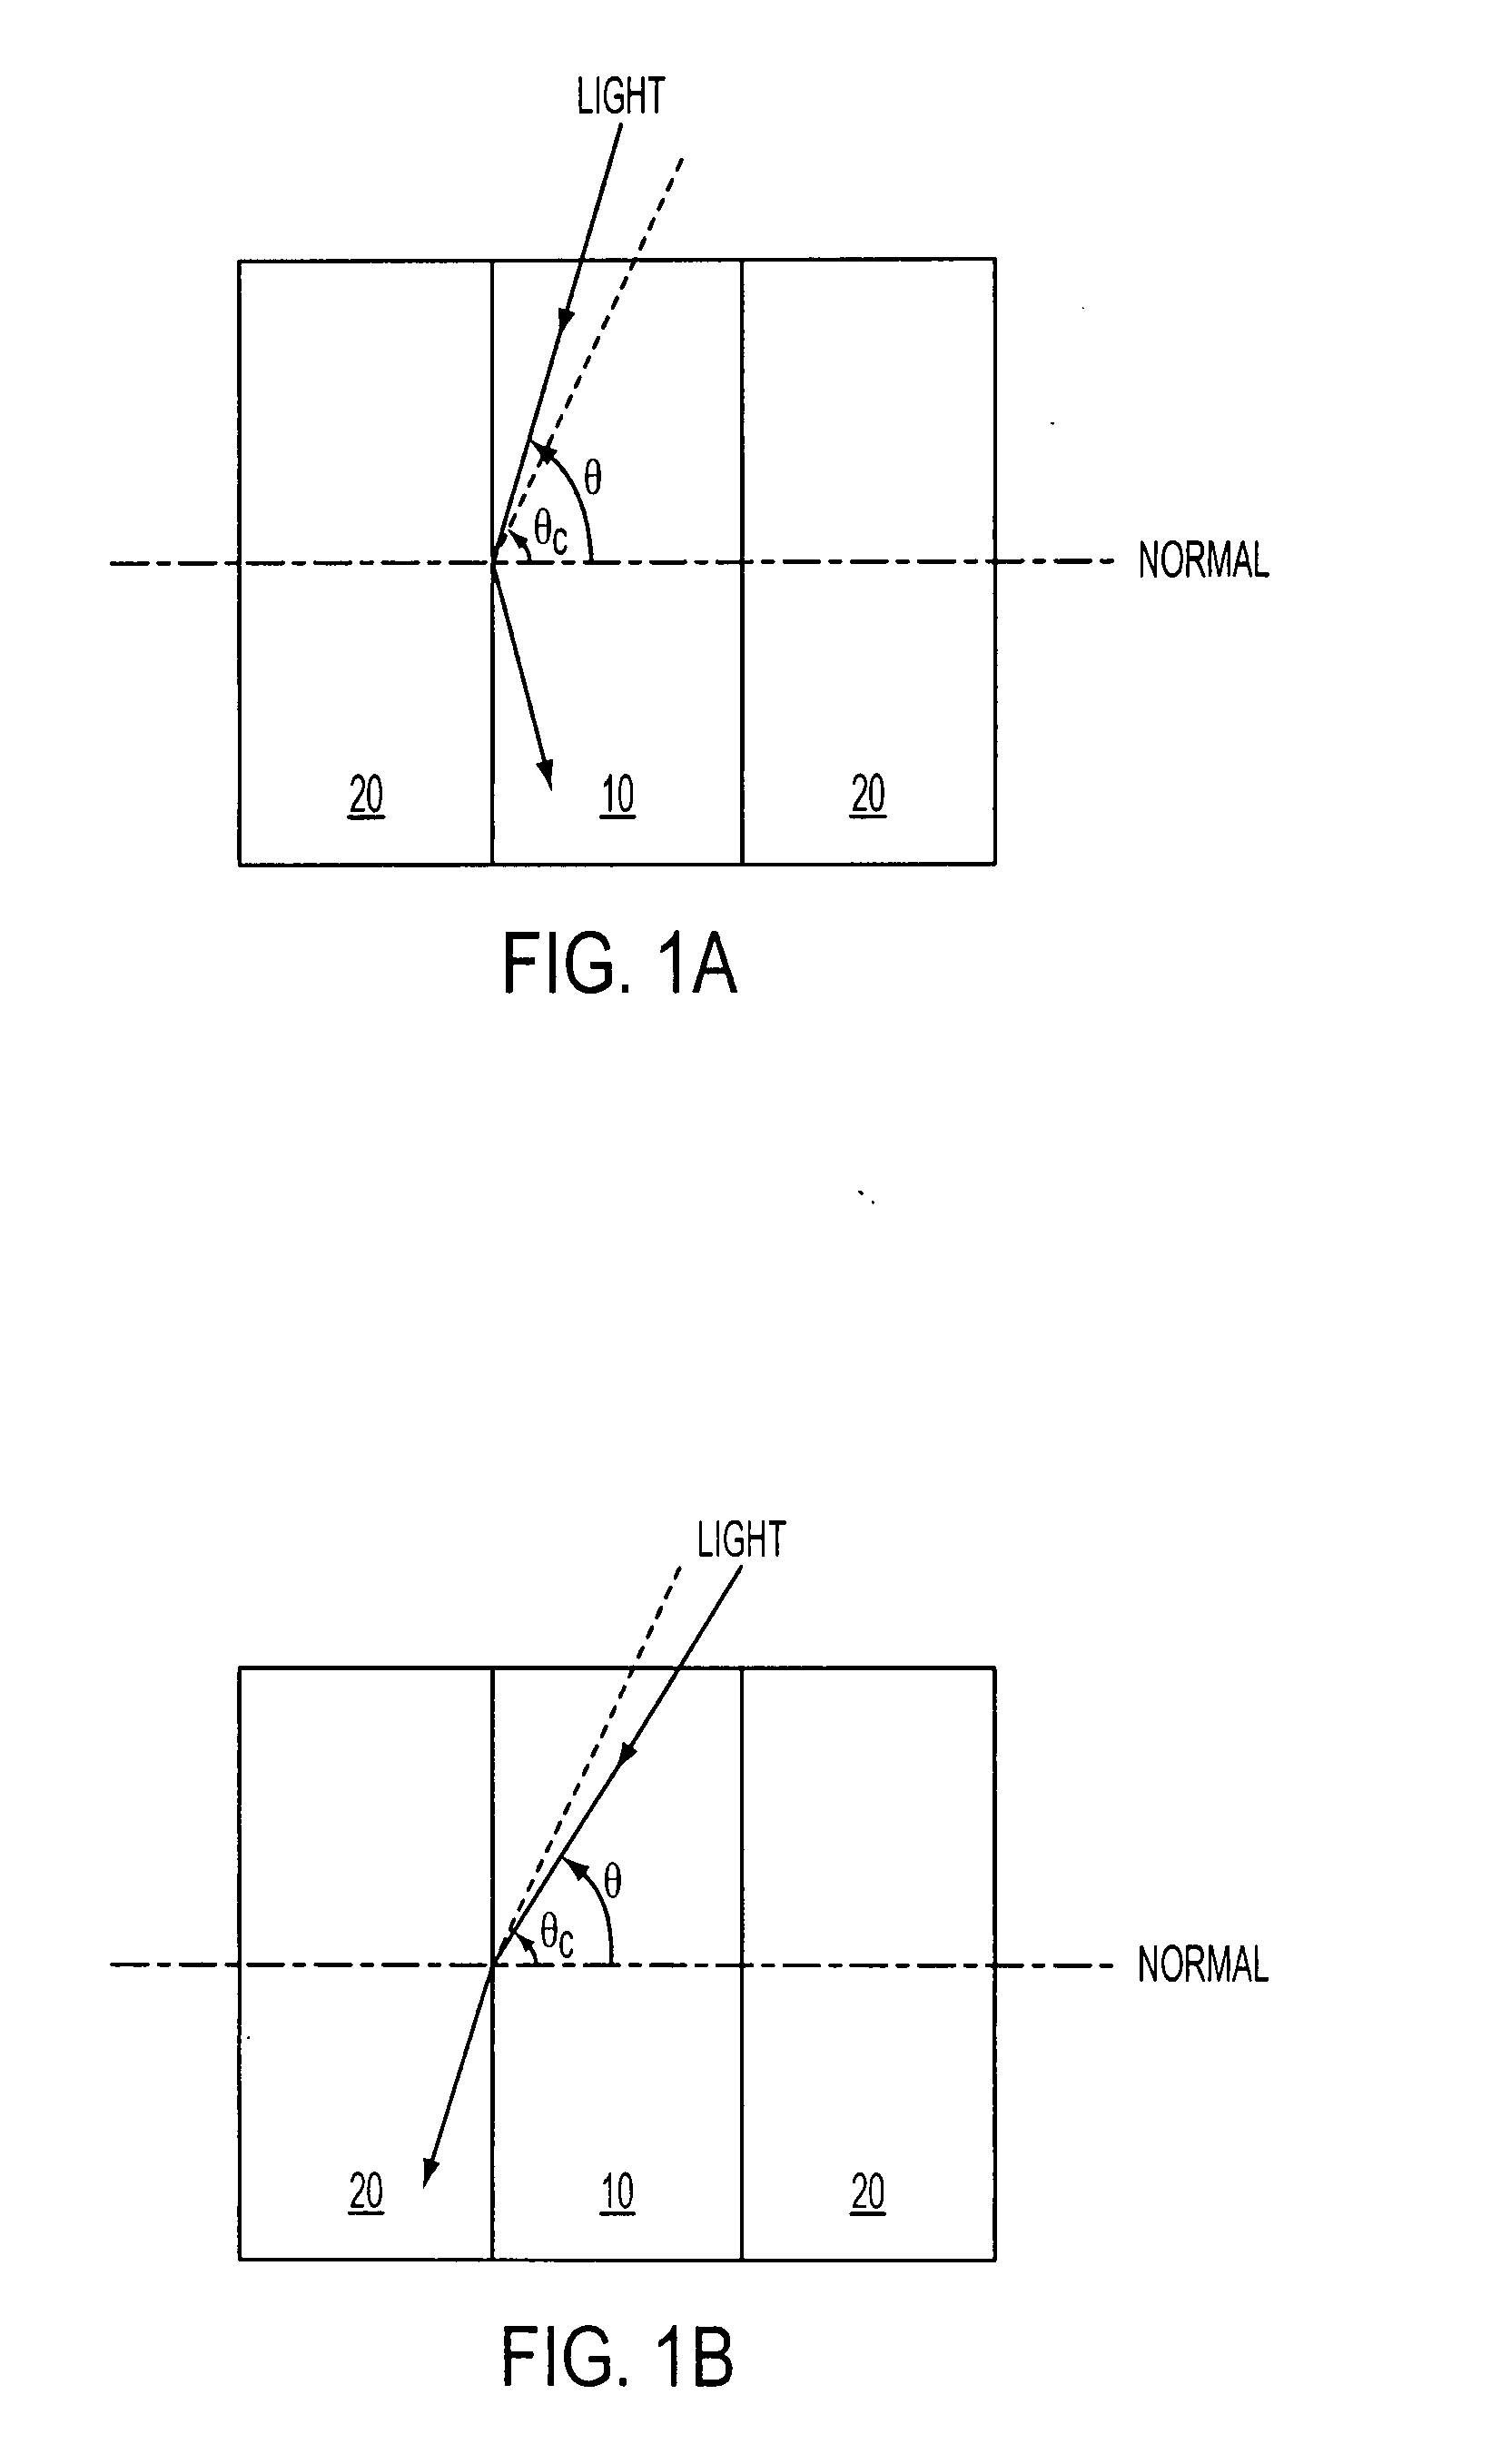 Anti-resonant reflecting optical waveguide for imager light pipe